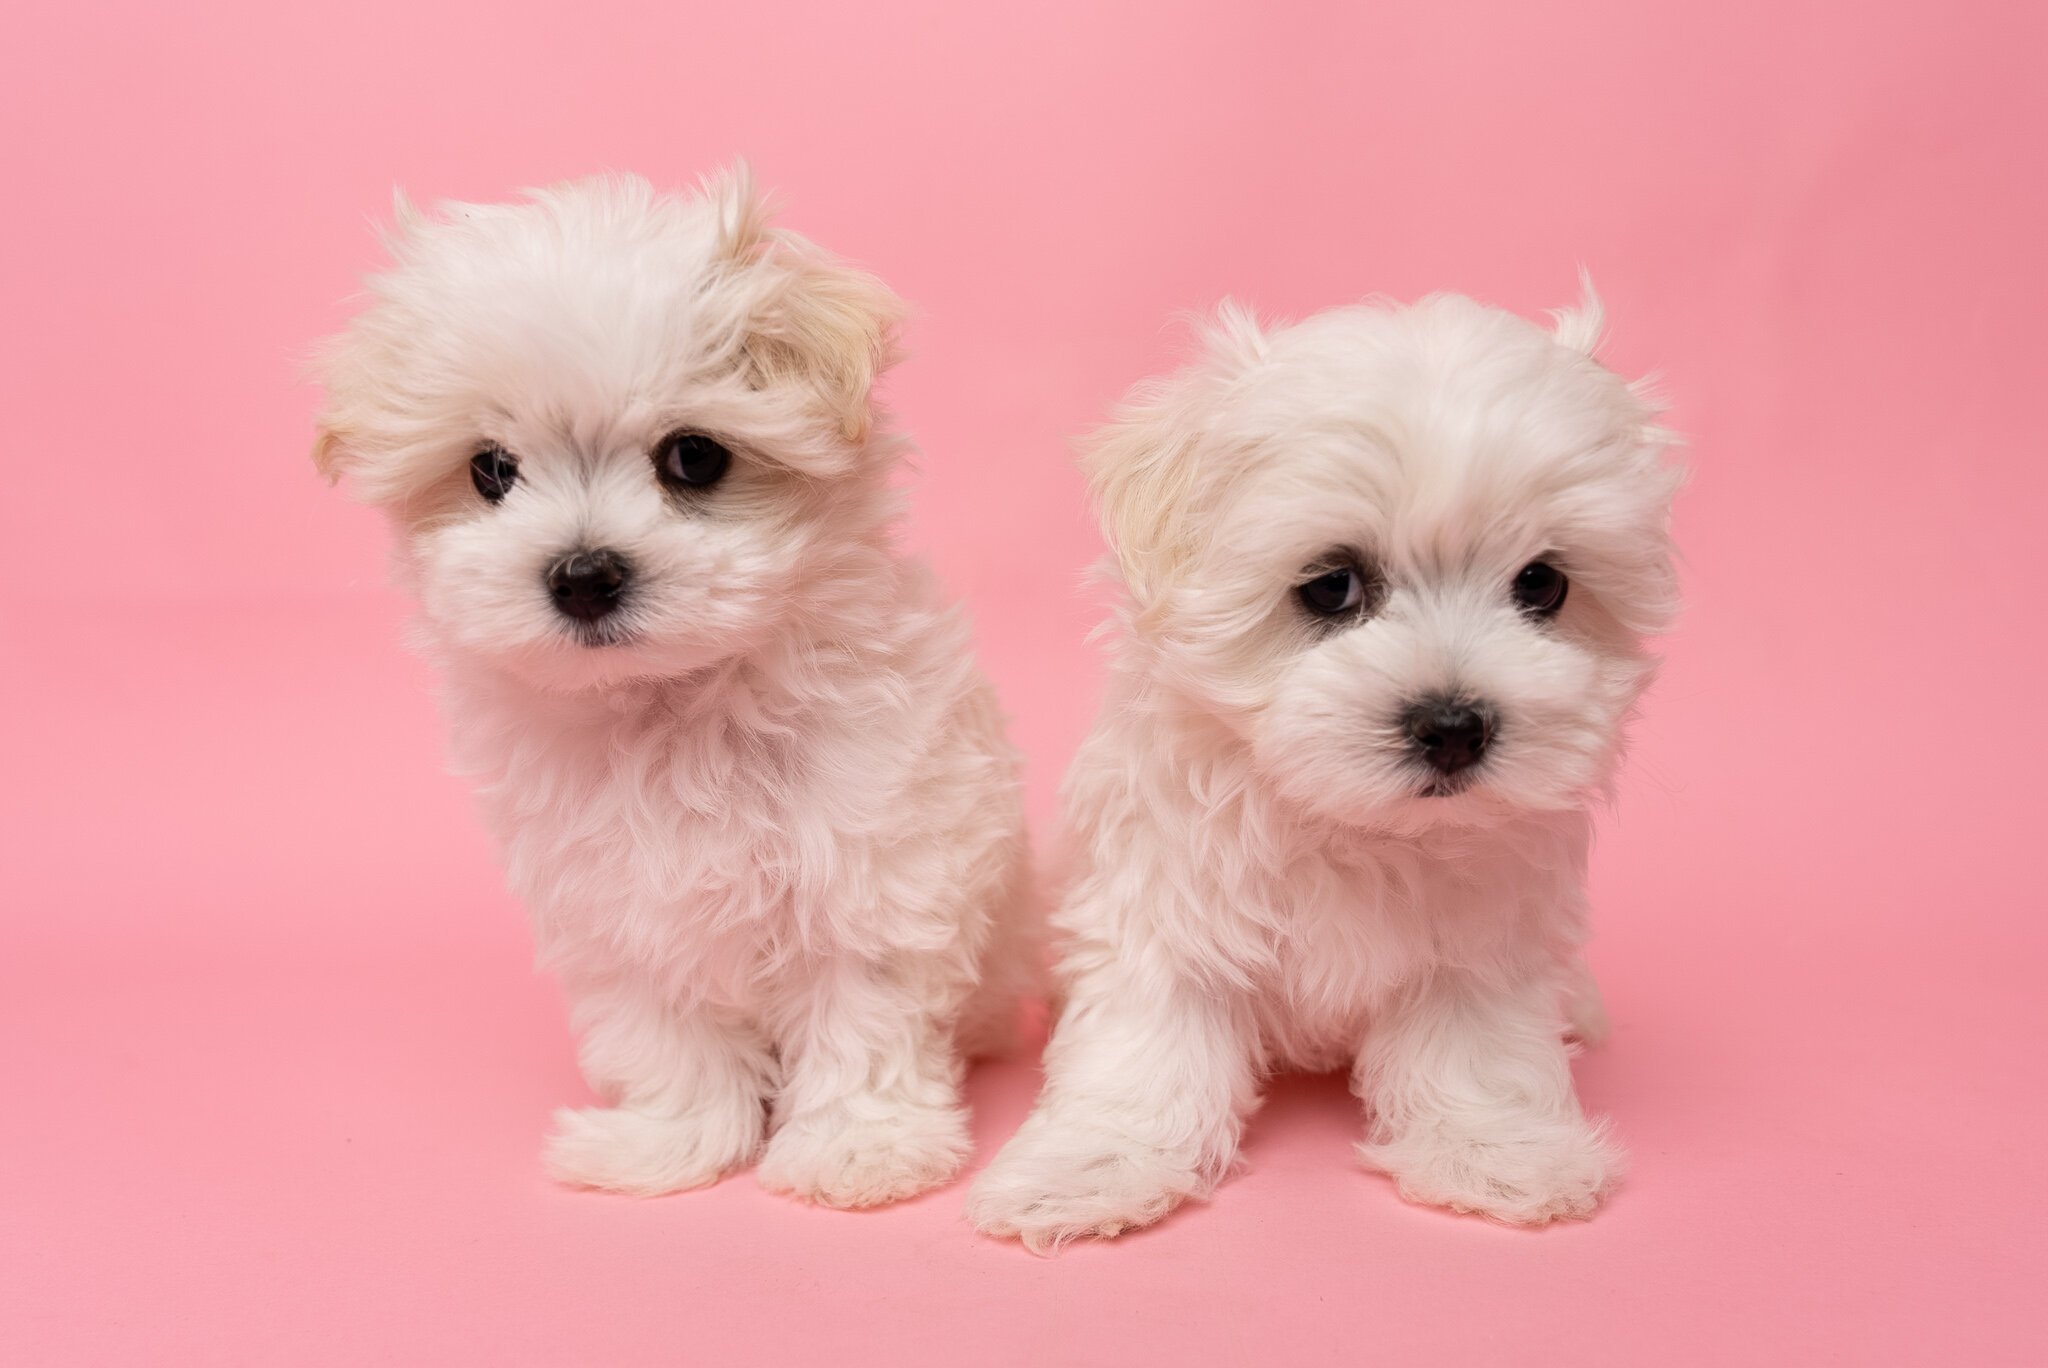 how much is pet insurance for a puppy